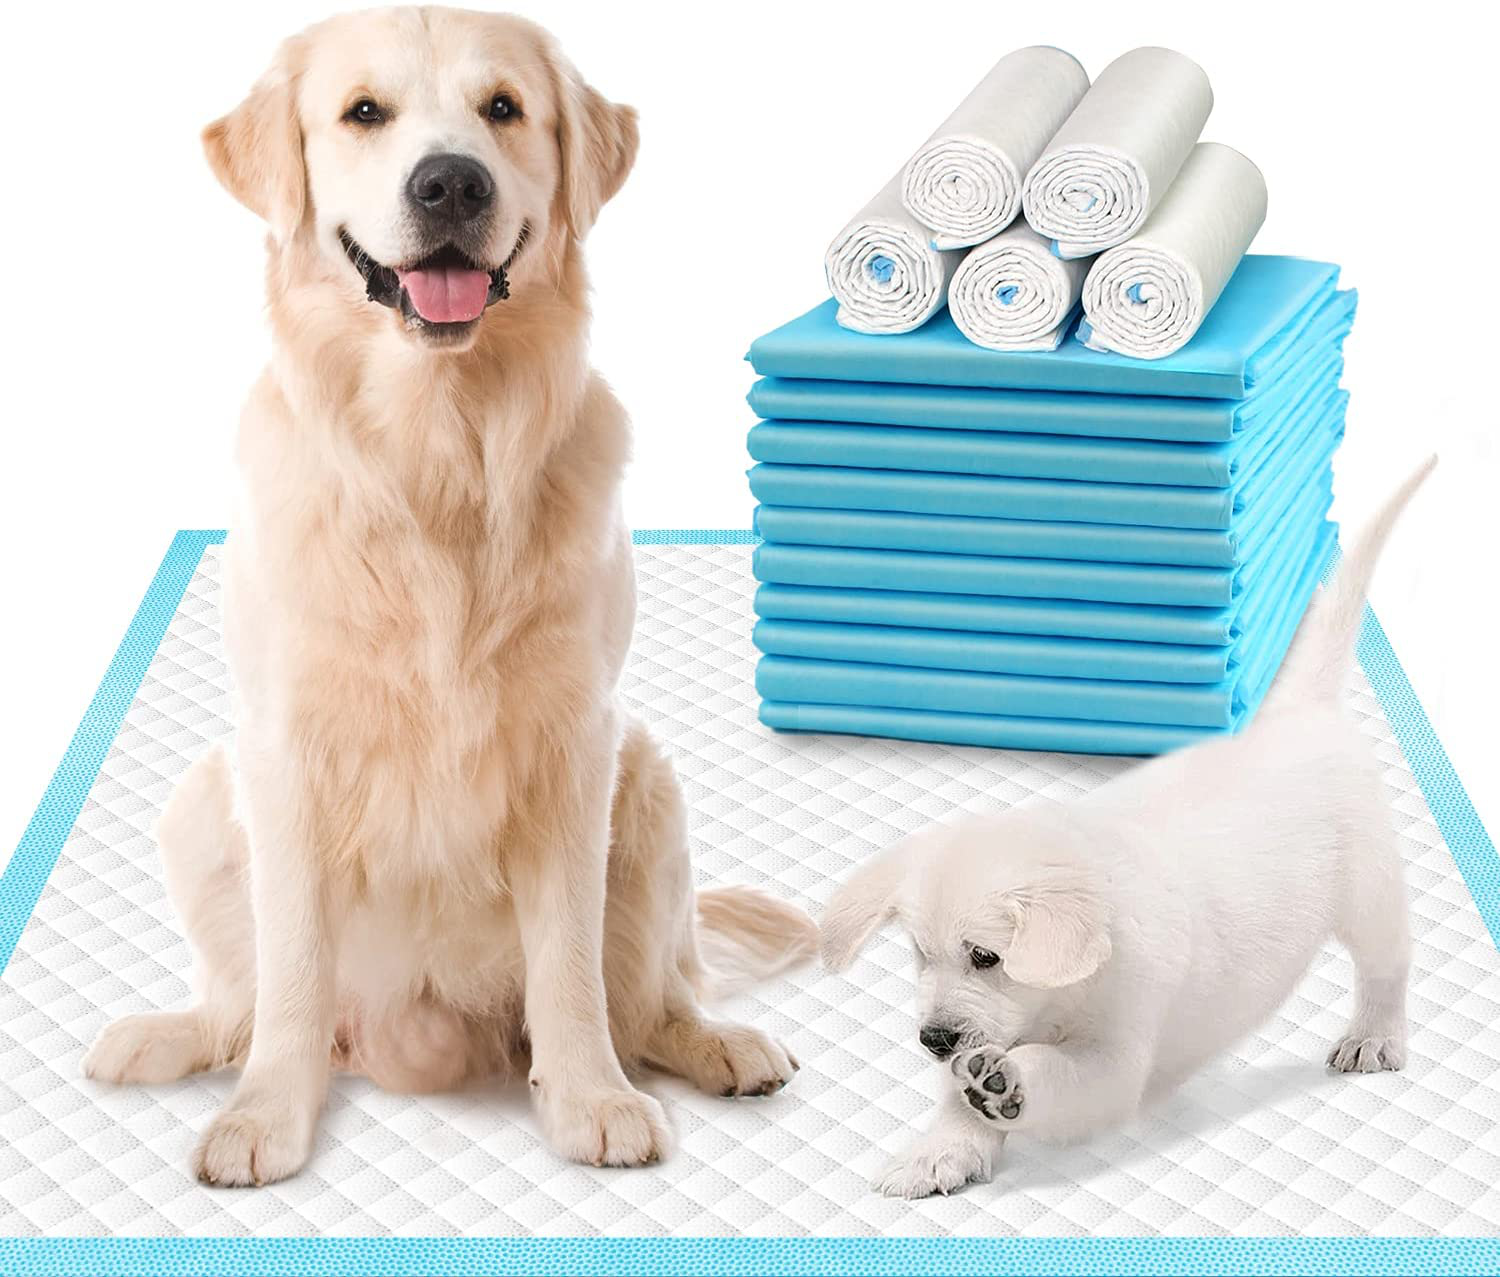 Deep Dear Extra Large Dog Pee Pads, Thicker Puppy Pads, Super Absorbent Pee Pads for Dogs, Disposable Dog Training Pads for Doggies, Cats, Rabbits, Leak-Proof Pet Pads for Housetraining Animals & Pet Supplies > Pet Supplies > Dog Supplies > Dog Diaper Pads & Liners Deep Dear XLarge: 30"x26" - 40 Count  